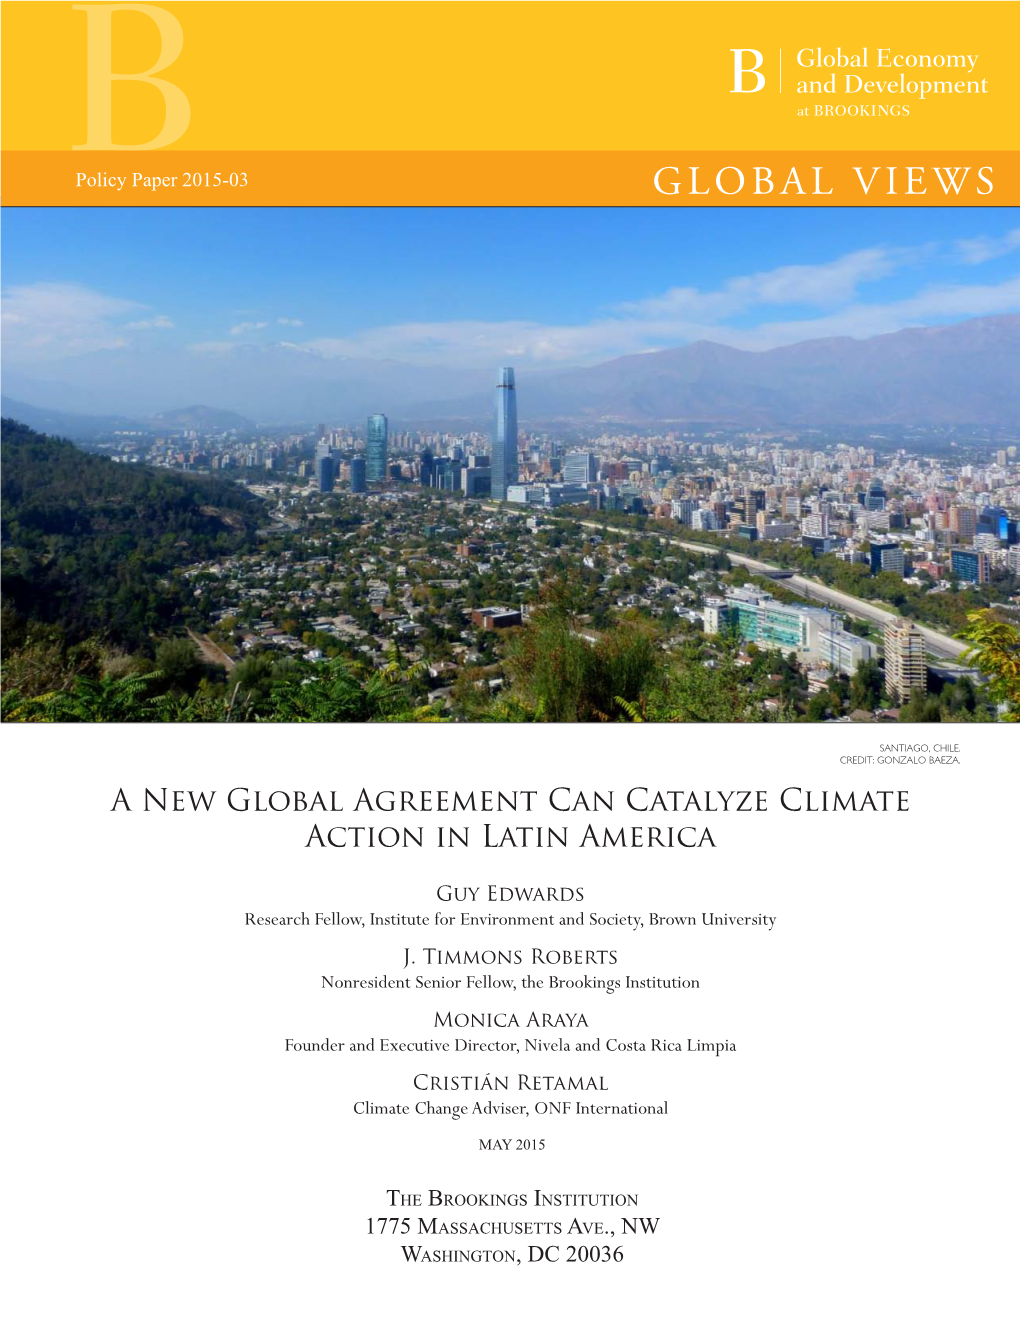 A New Global Agreement Can Catalyze Climate Action in Latin America